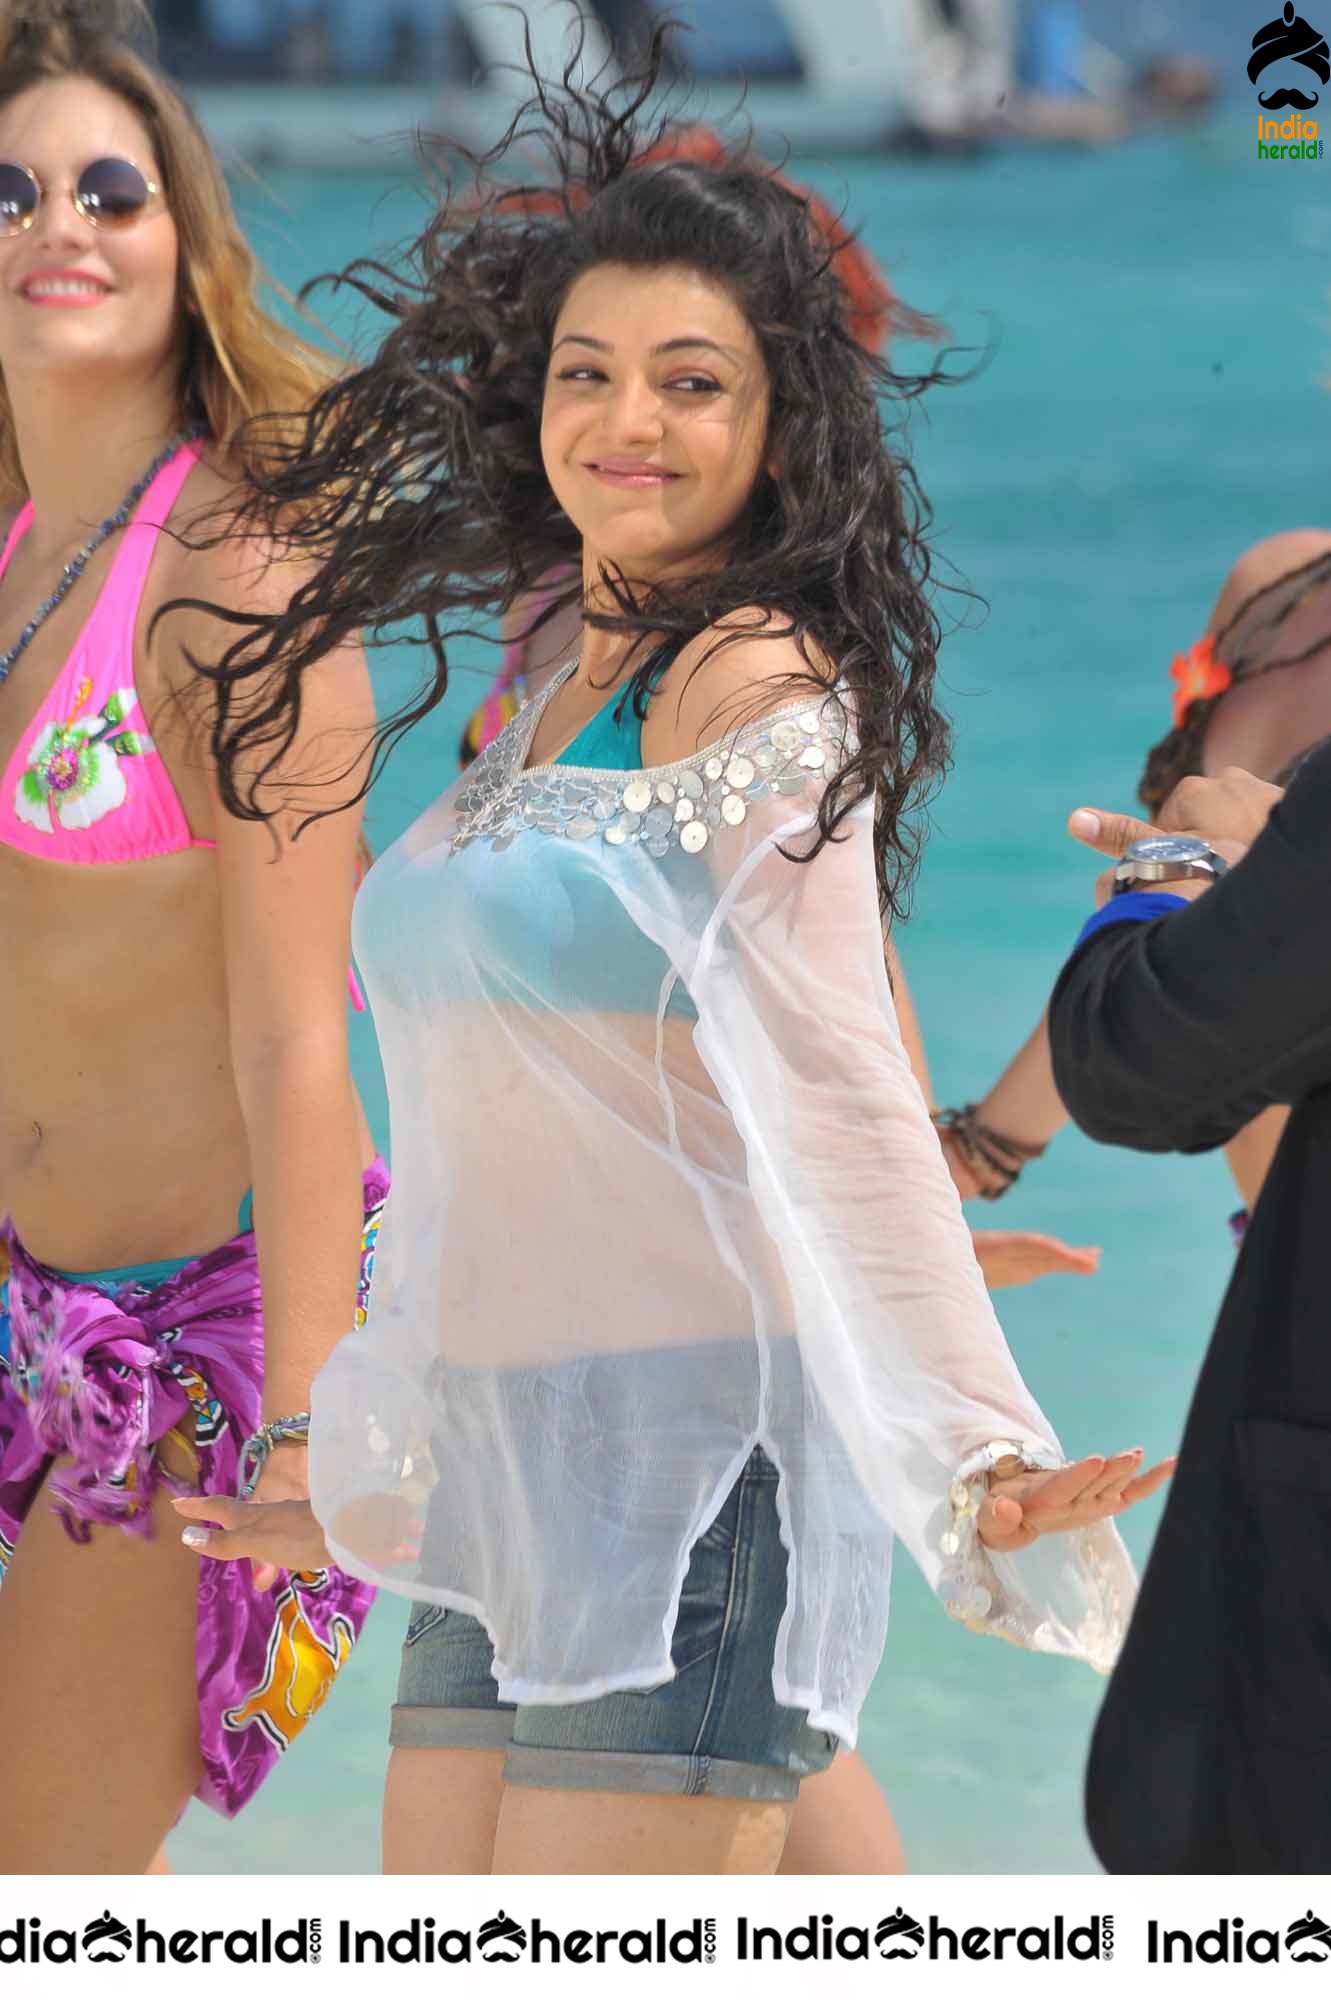 When Kajal Aggarwal gets wet by Beach Side and teases our Mood